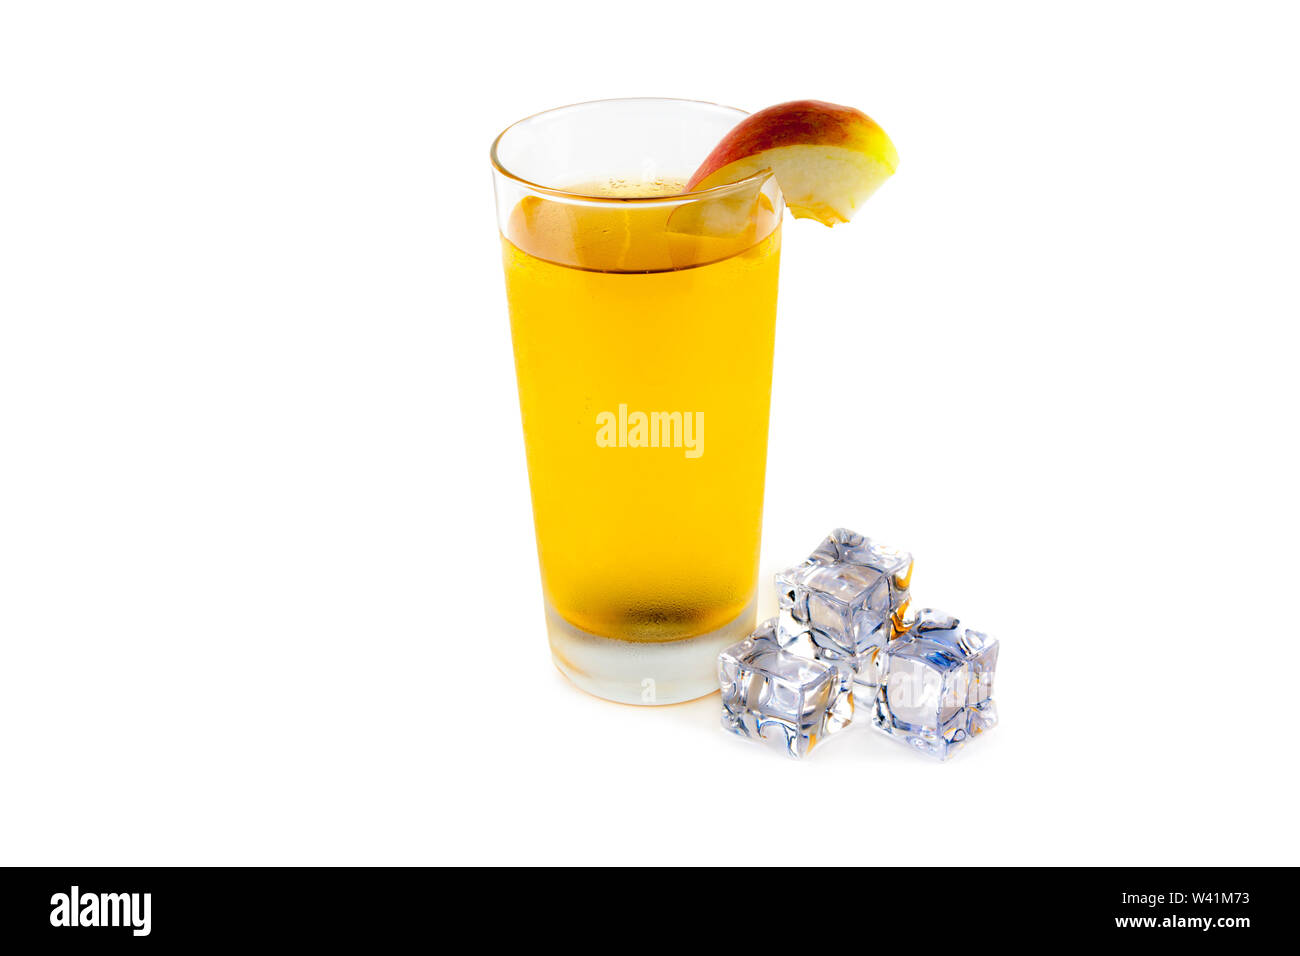 Apples apple juice and ice cubes on a white background Stock Photo